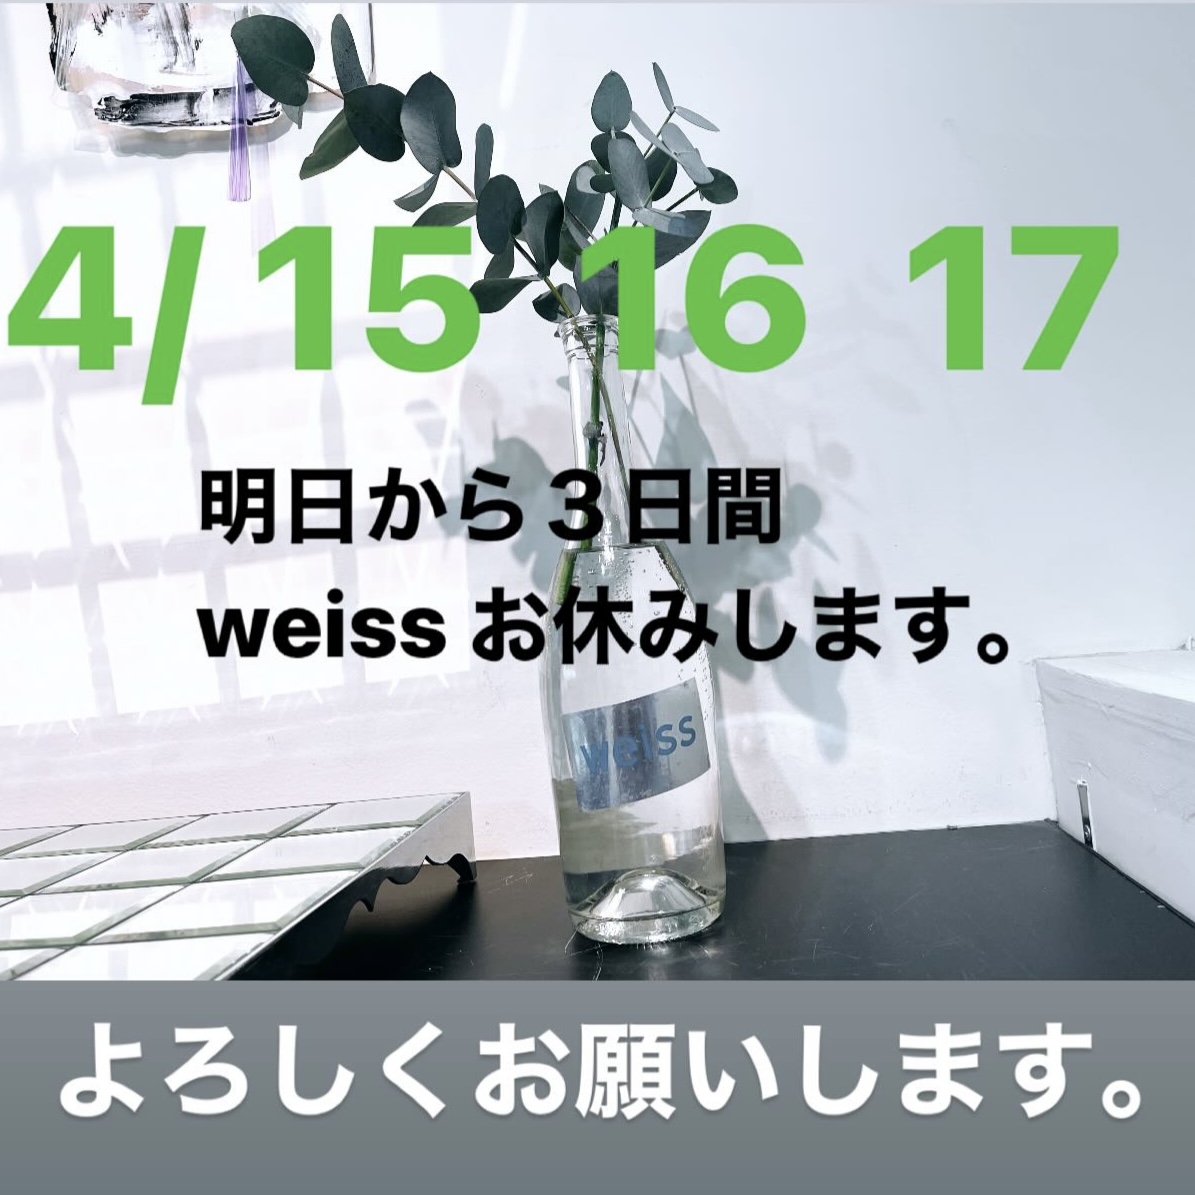 4/15  16  17 weiss お休みします。